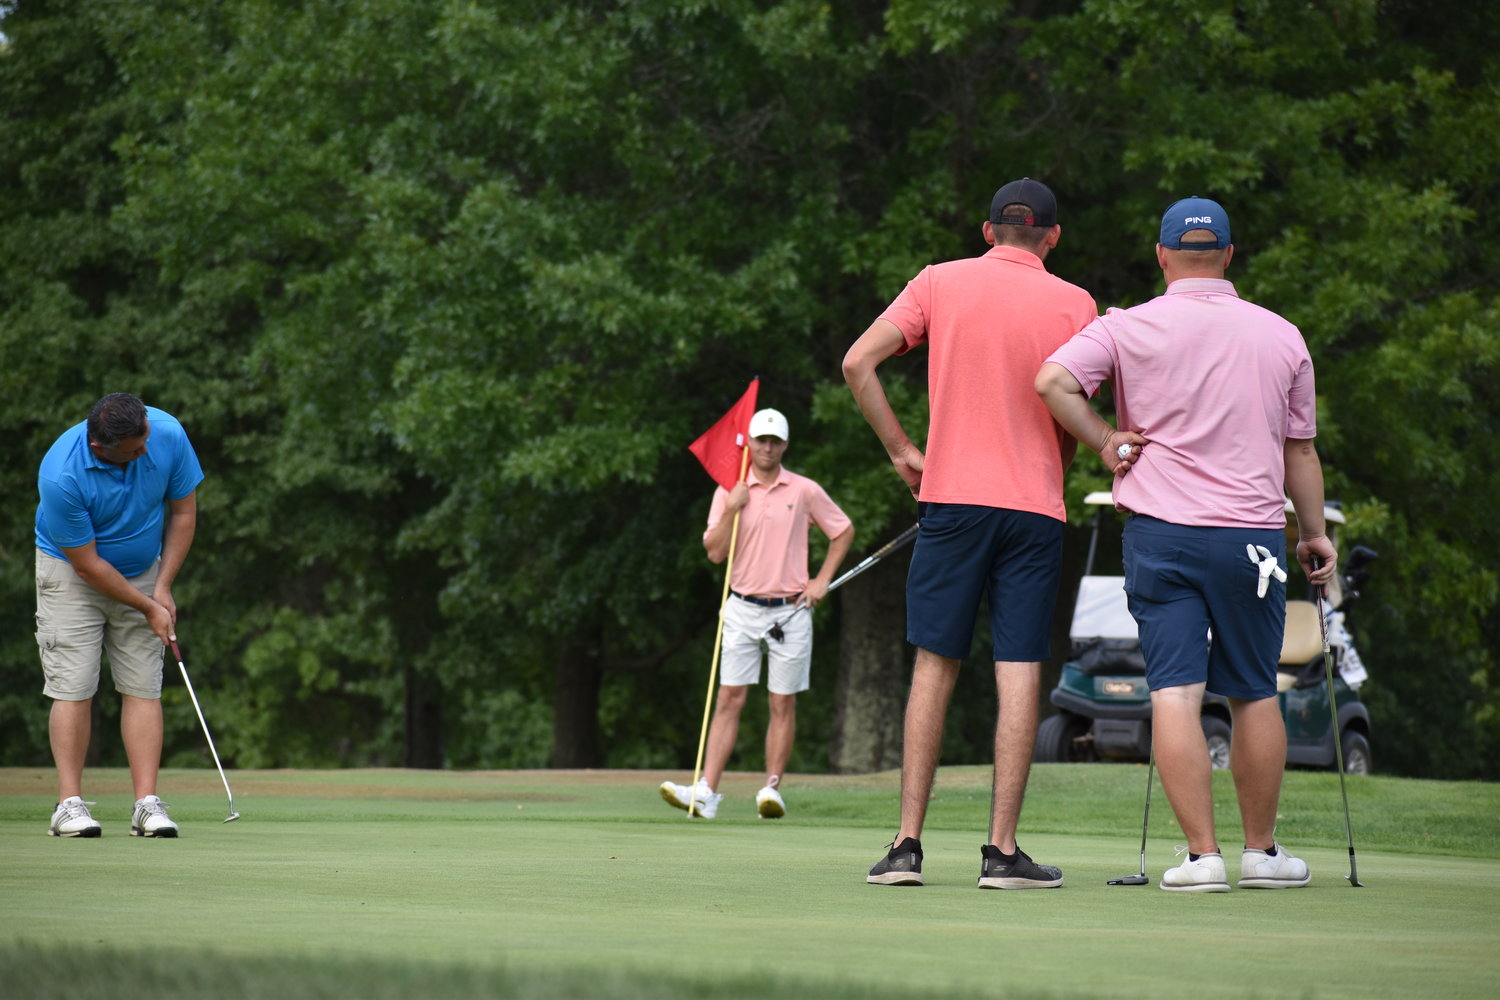 Michael Decker putts on 16. The ball took an unfortunate hop out of the hole and led to Semenetz and Winski tying the hole and keeping a two-up lead going into 17. Looking on is Sean Semenetz, holding the flag, Michael Scuderi and Joe Winski, right.